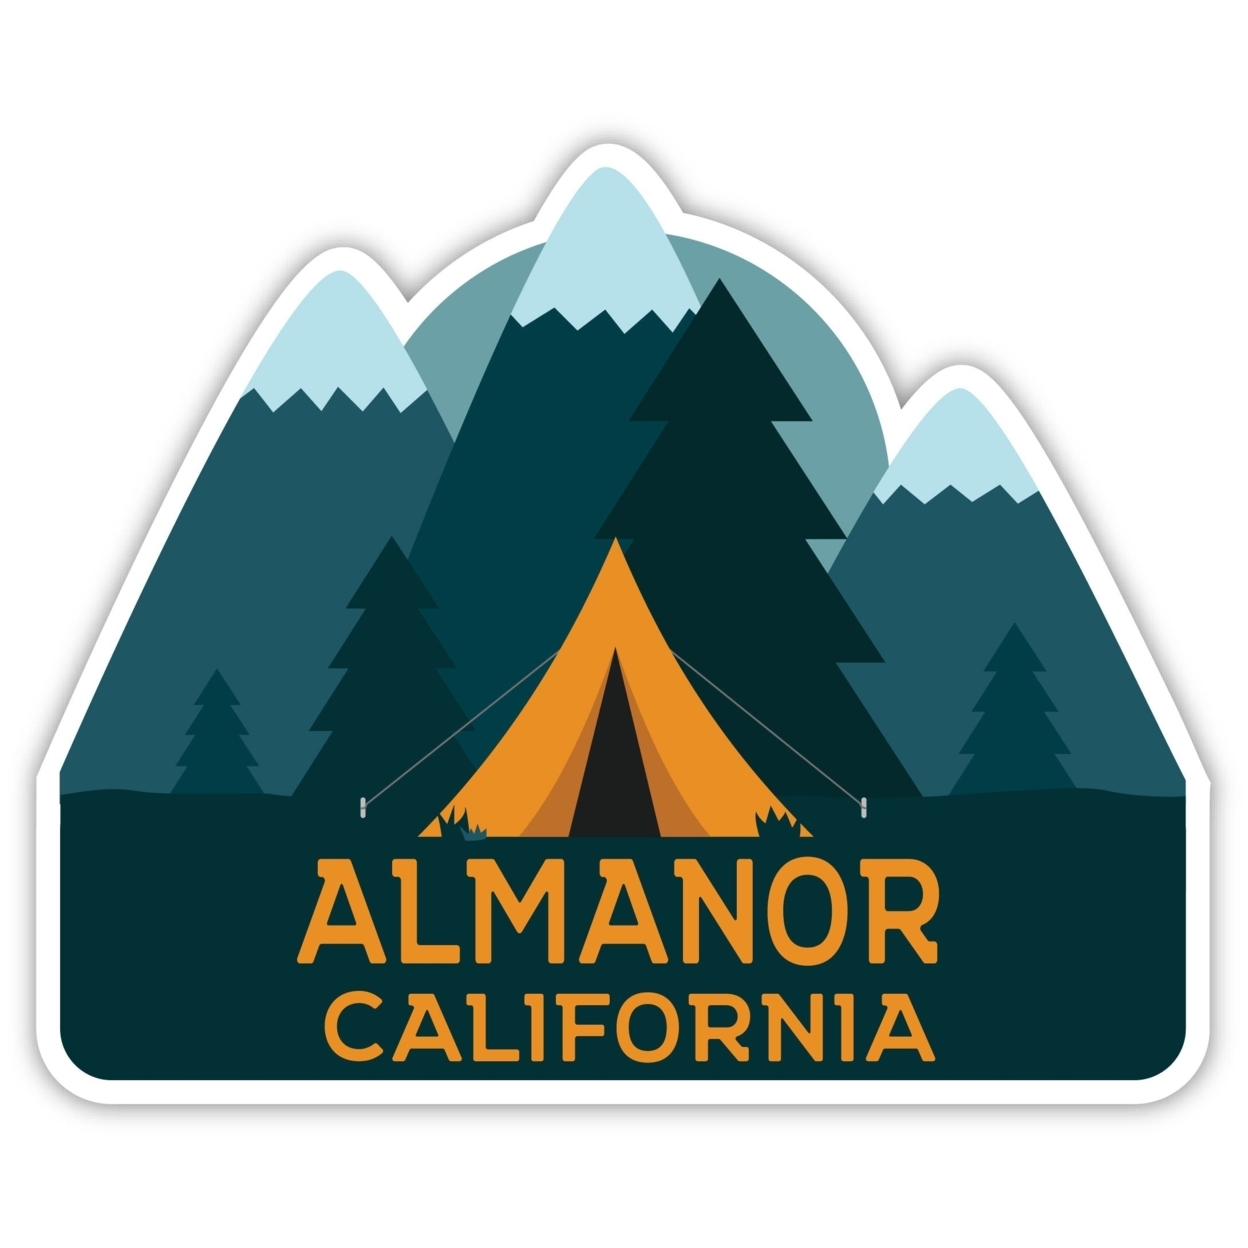 Almanor California Souvenir Decorative Stickers (Choose Theme And Size) - 4-Pack, 12-Inch, Bear